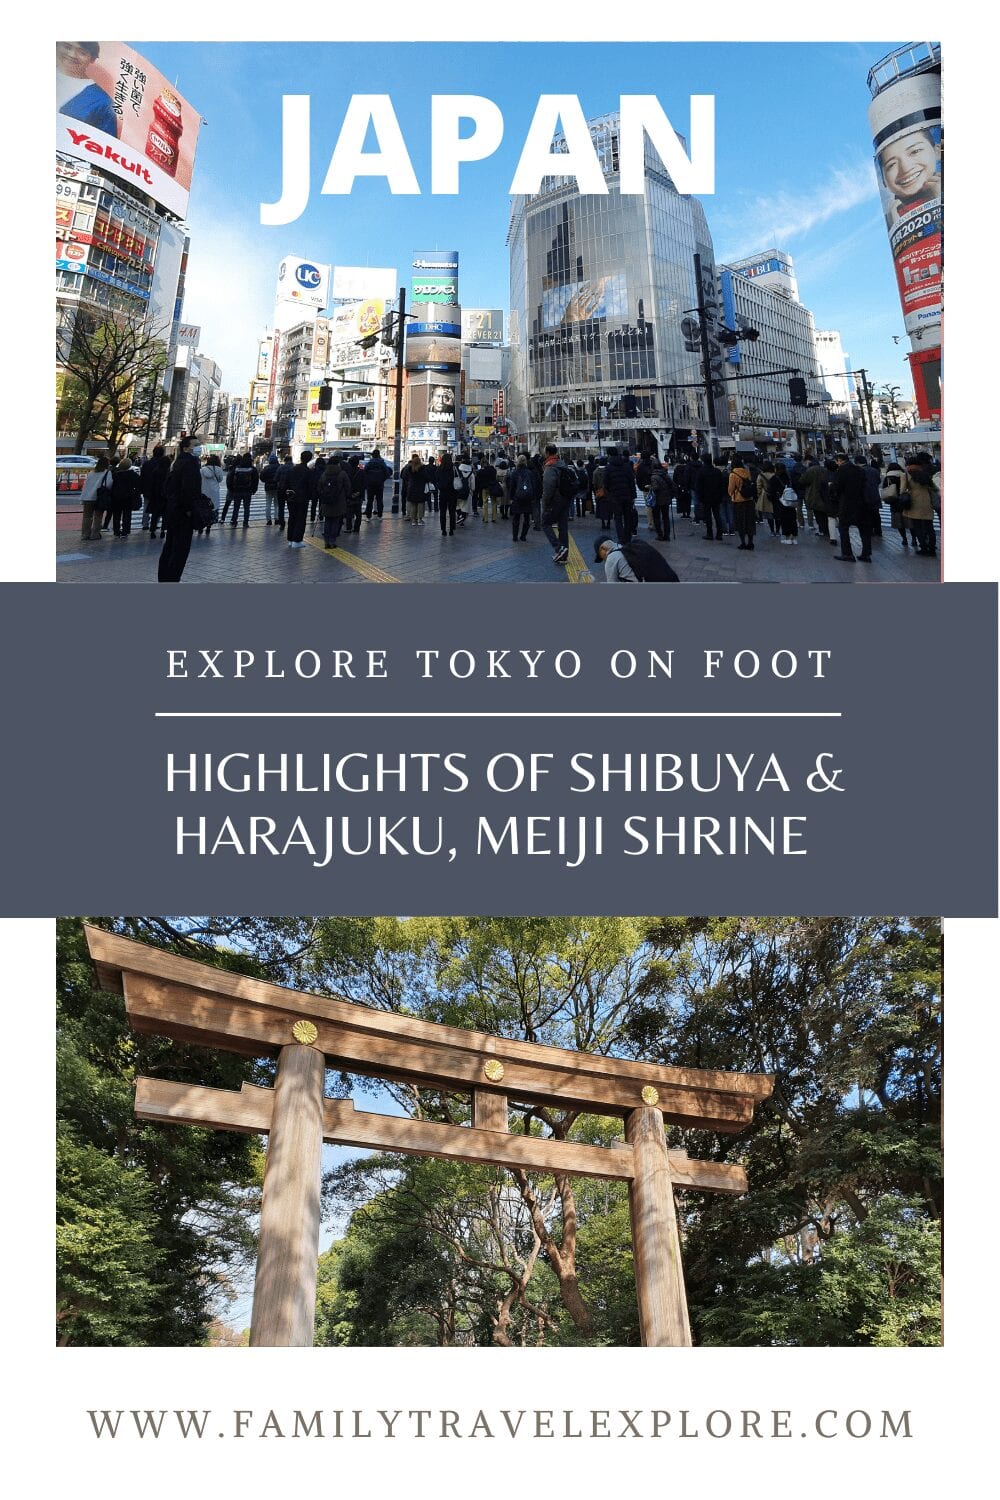 Spectacular Shibuya And Harajuku - An Unforgettable Walking Tour In Tokyo